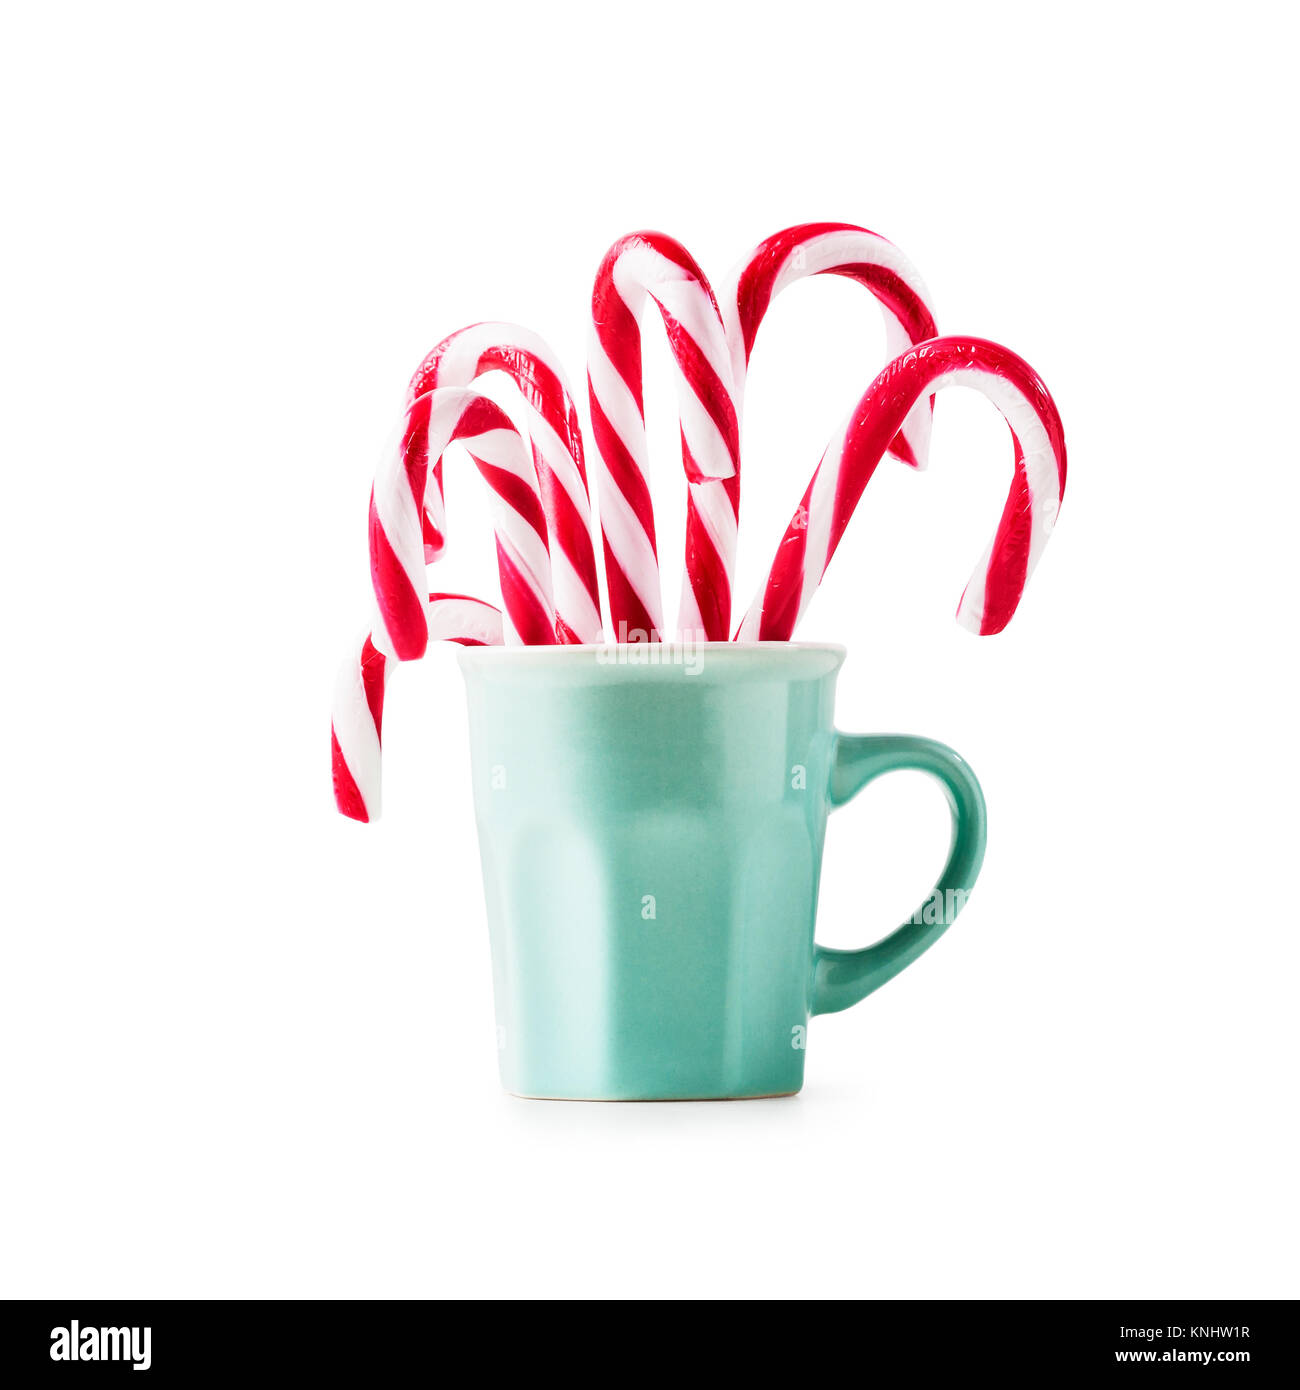 https://c8.alamy.com/comp/KNHW1R/christmas-candy-canes-in-cup-isolated-on-white-background-clipping-KNHW1R.jpg